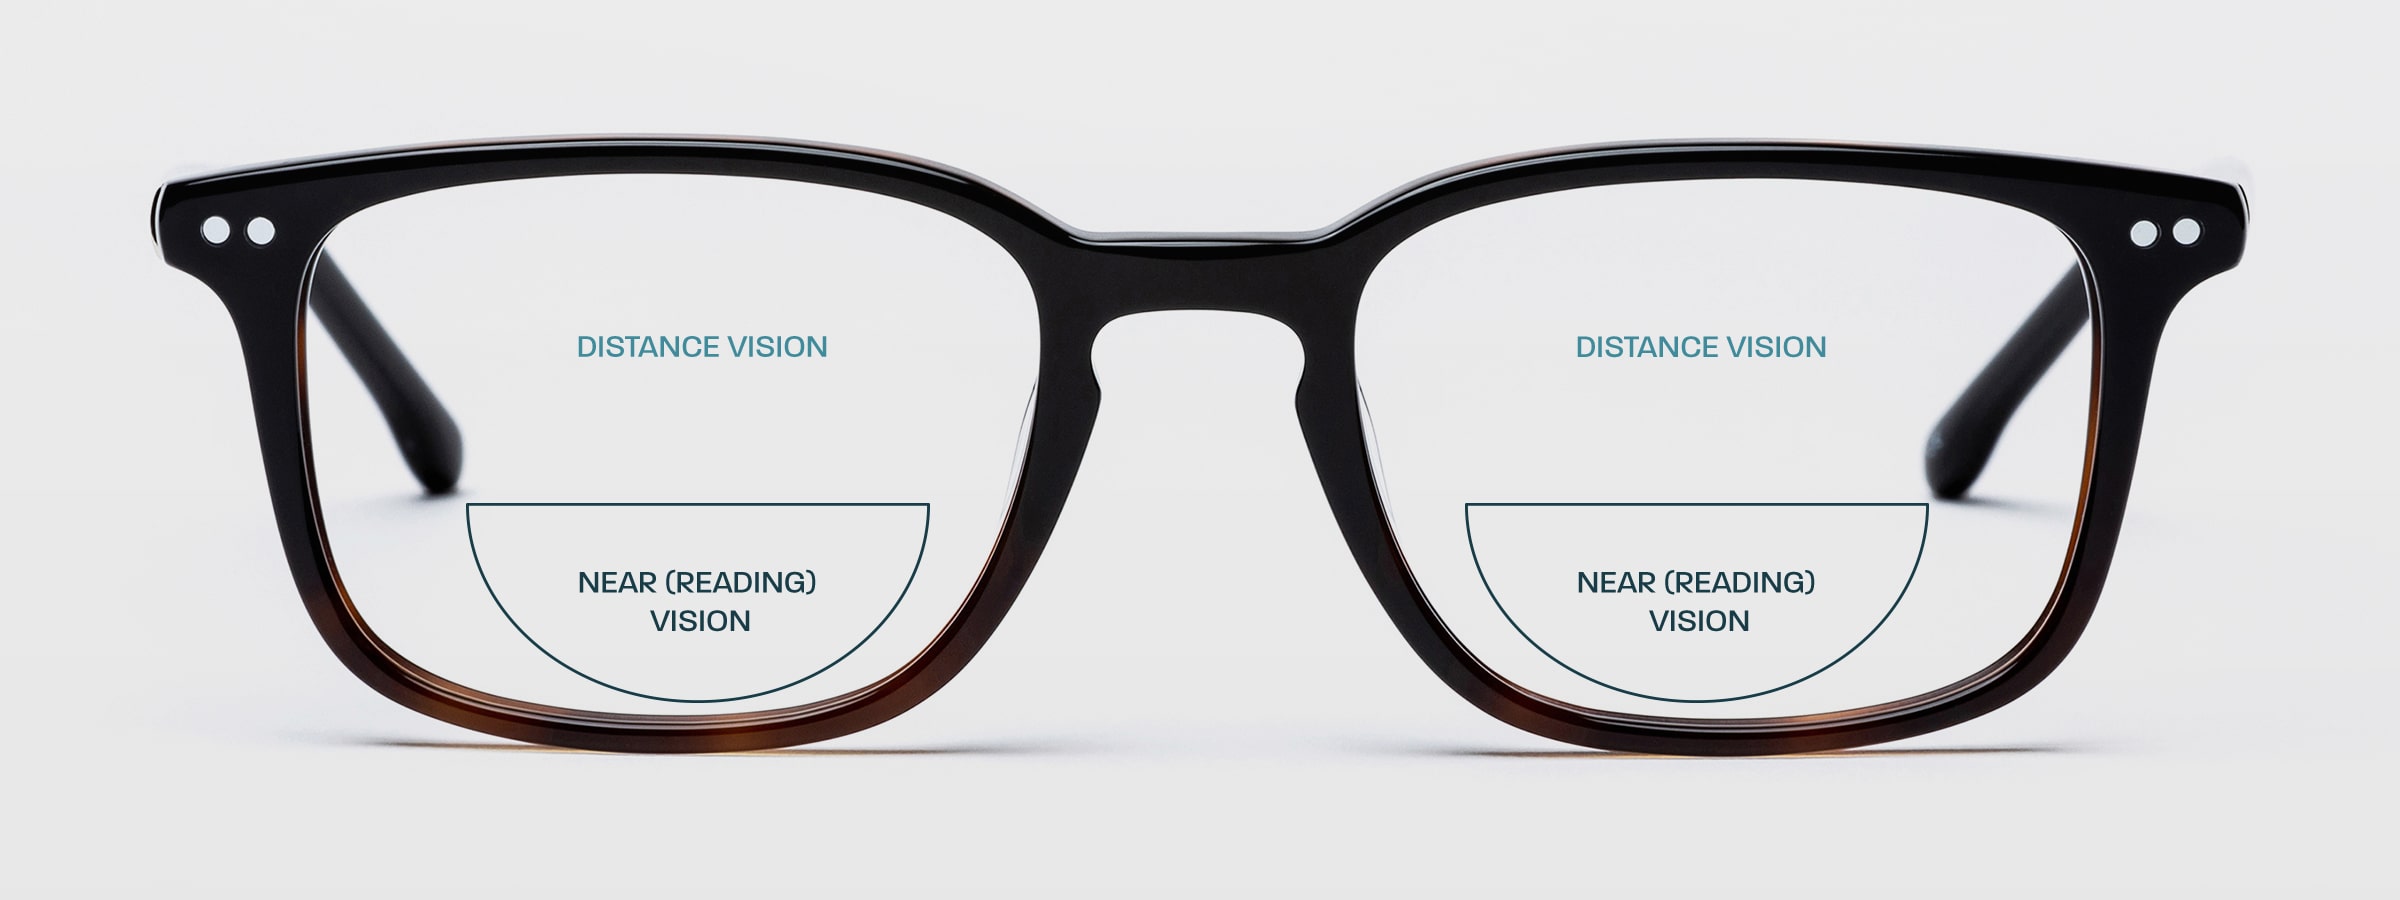 A pair of bifocal glasses with the sections for different distances highlighted